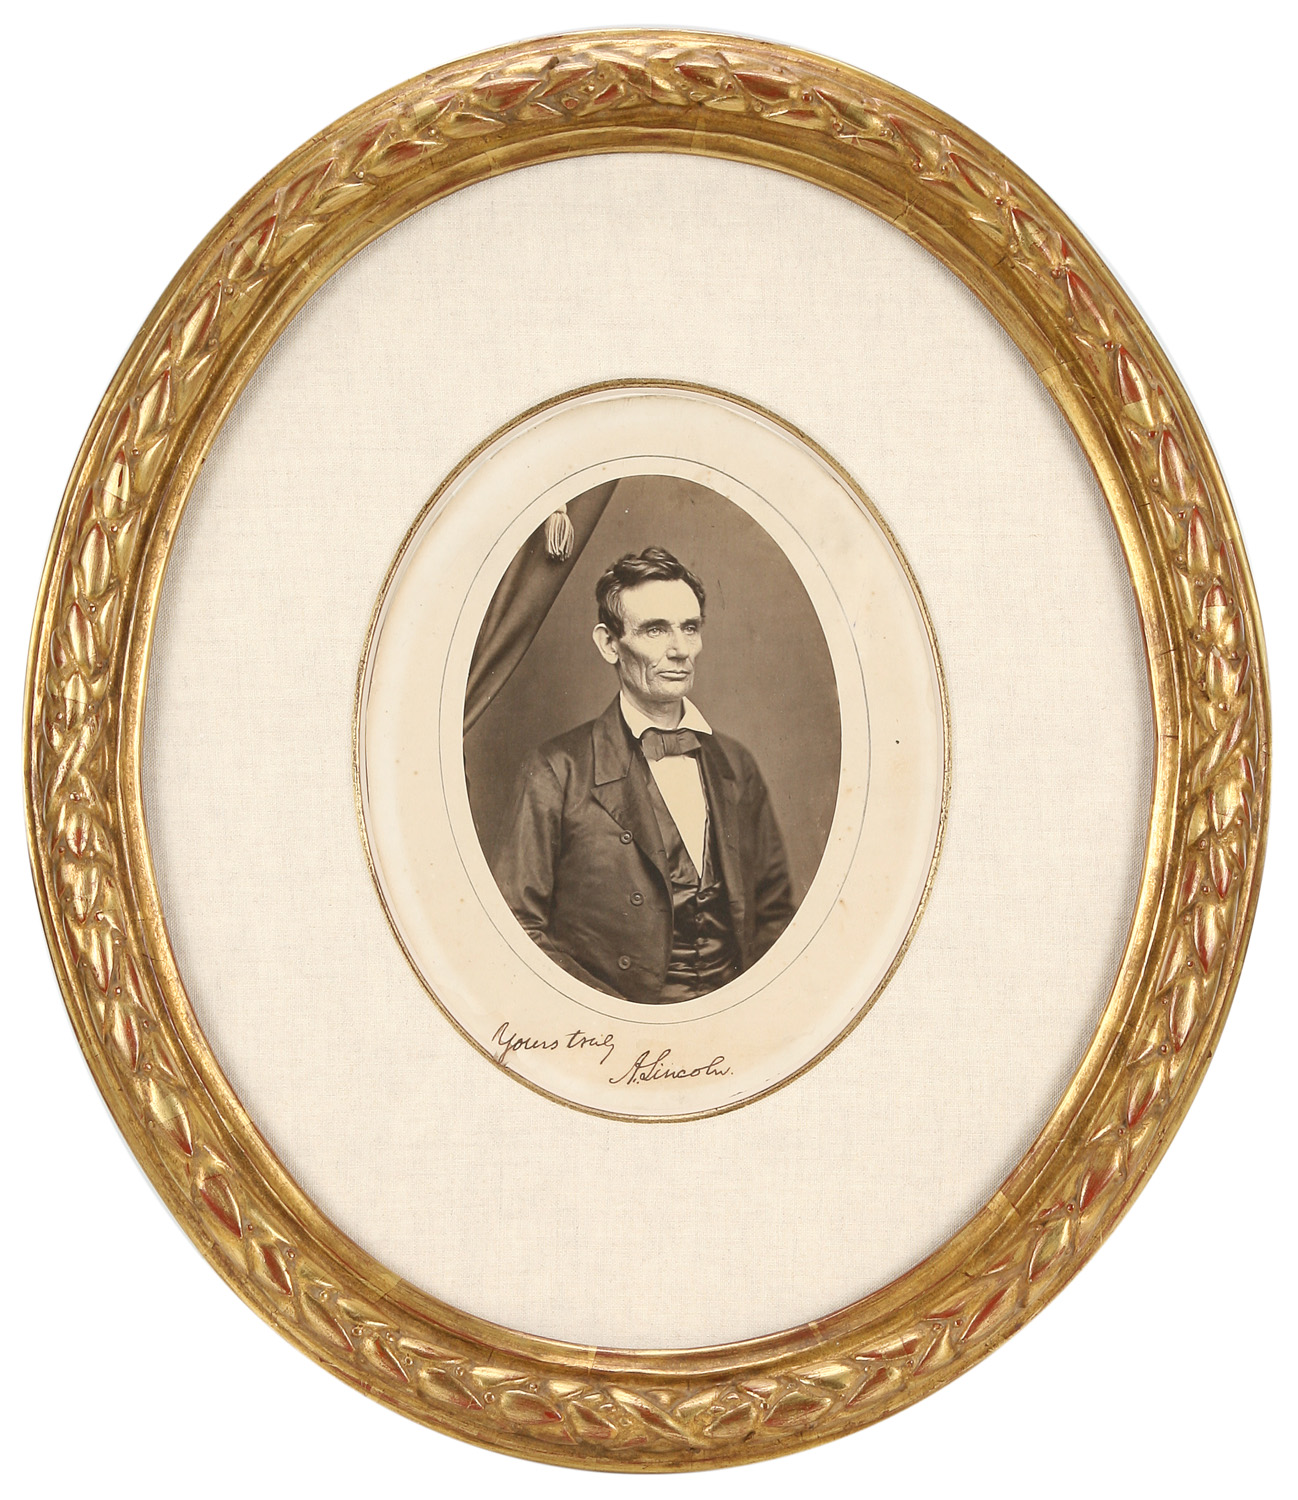 Roderick Cole's 1858 Beardless Photo of Abraham Lincoln--Signed "Yours Truly, A. Lincoln"